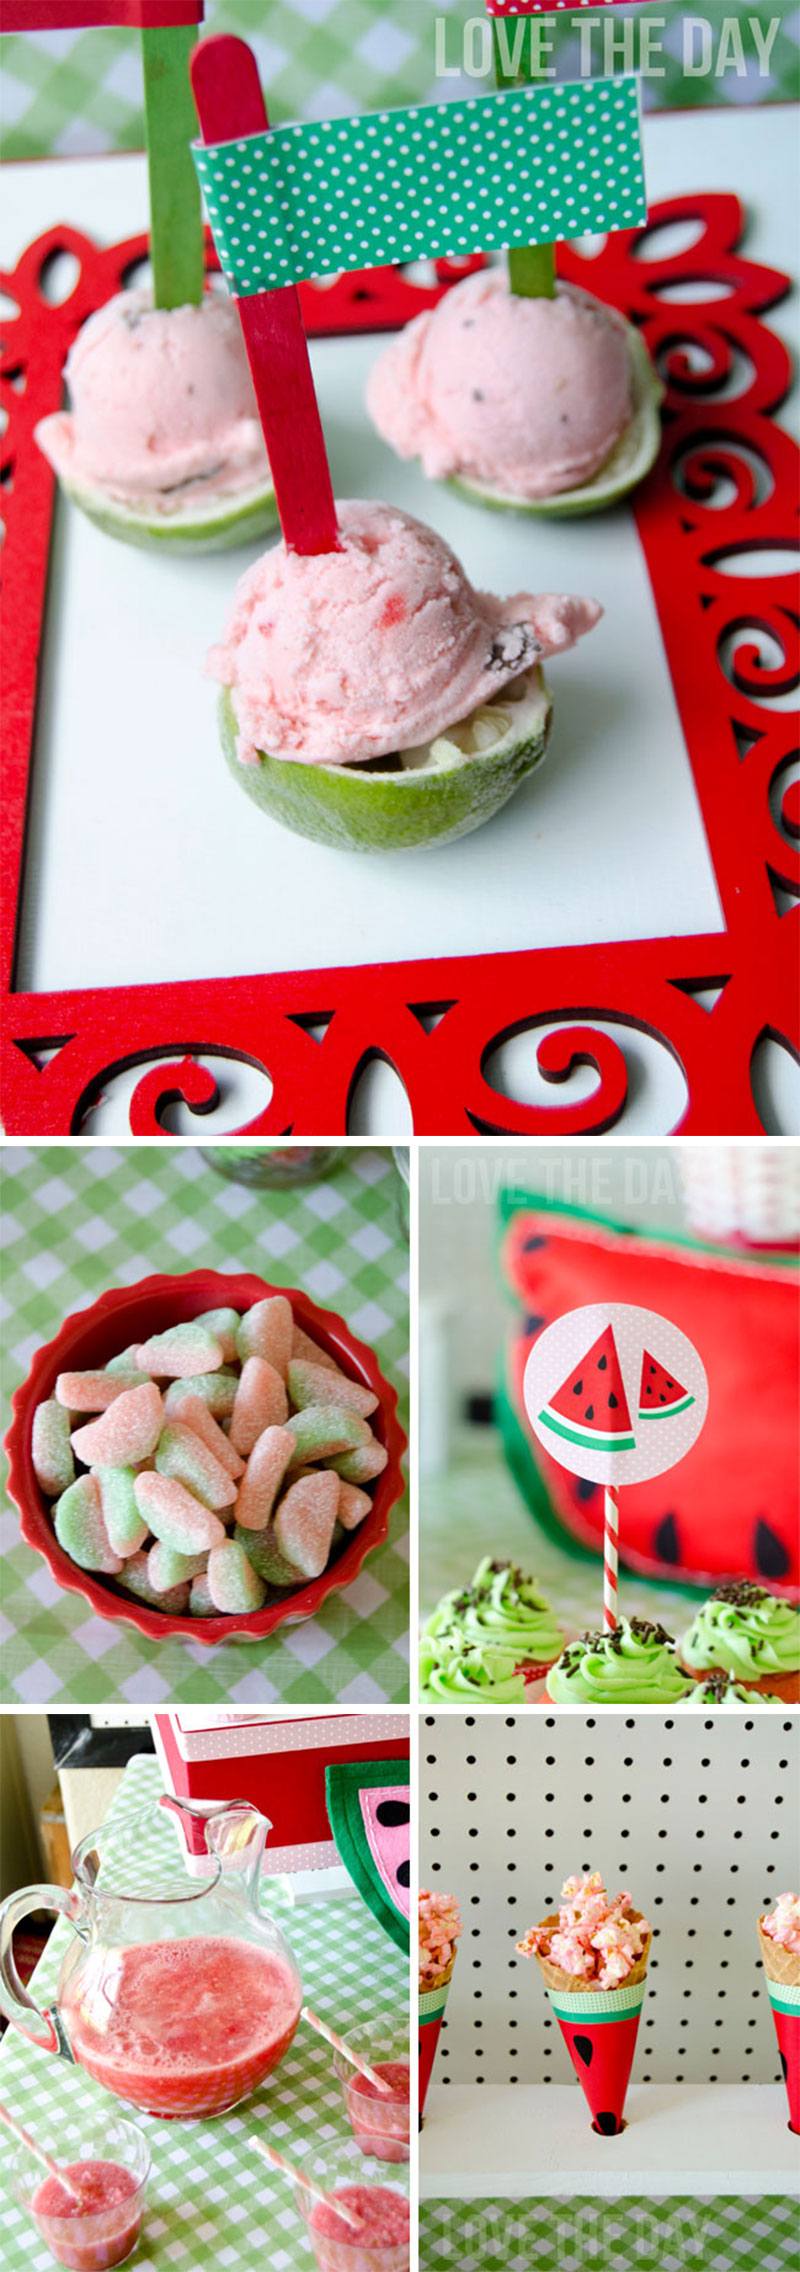 Watermelon Party Dessert Table by Lindi Haws of Love The Day